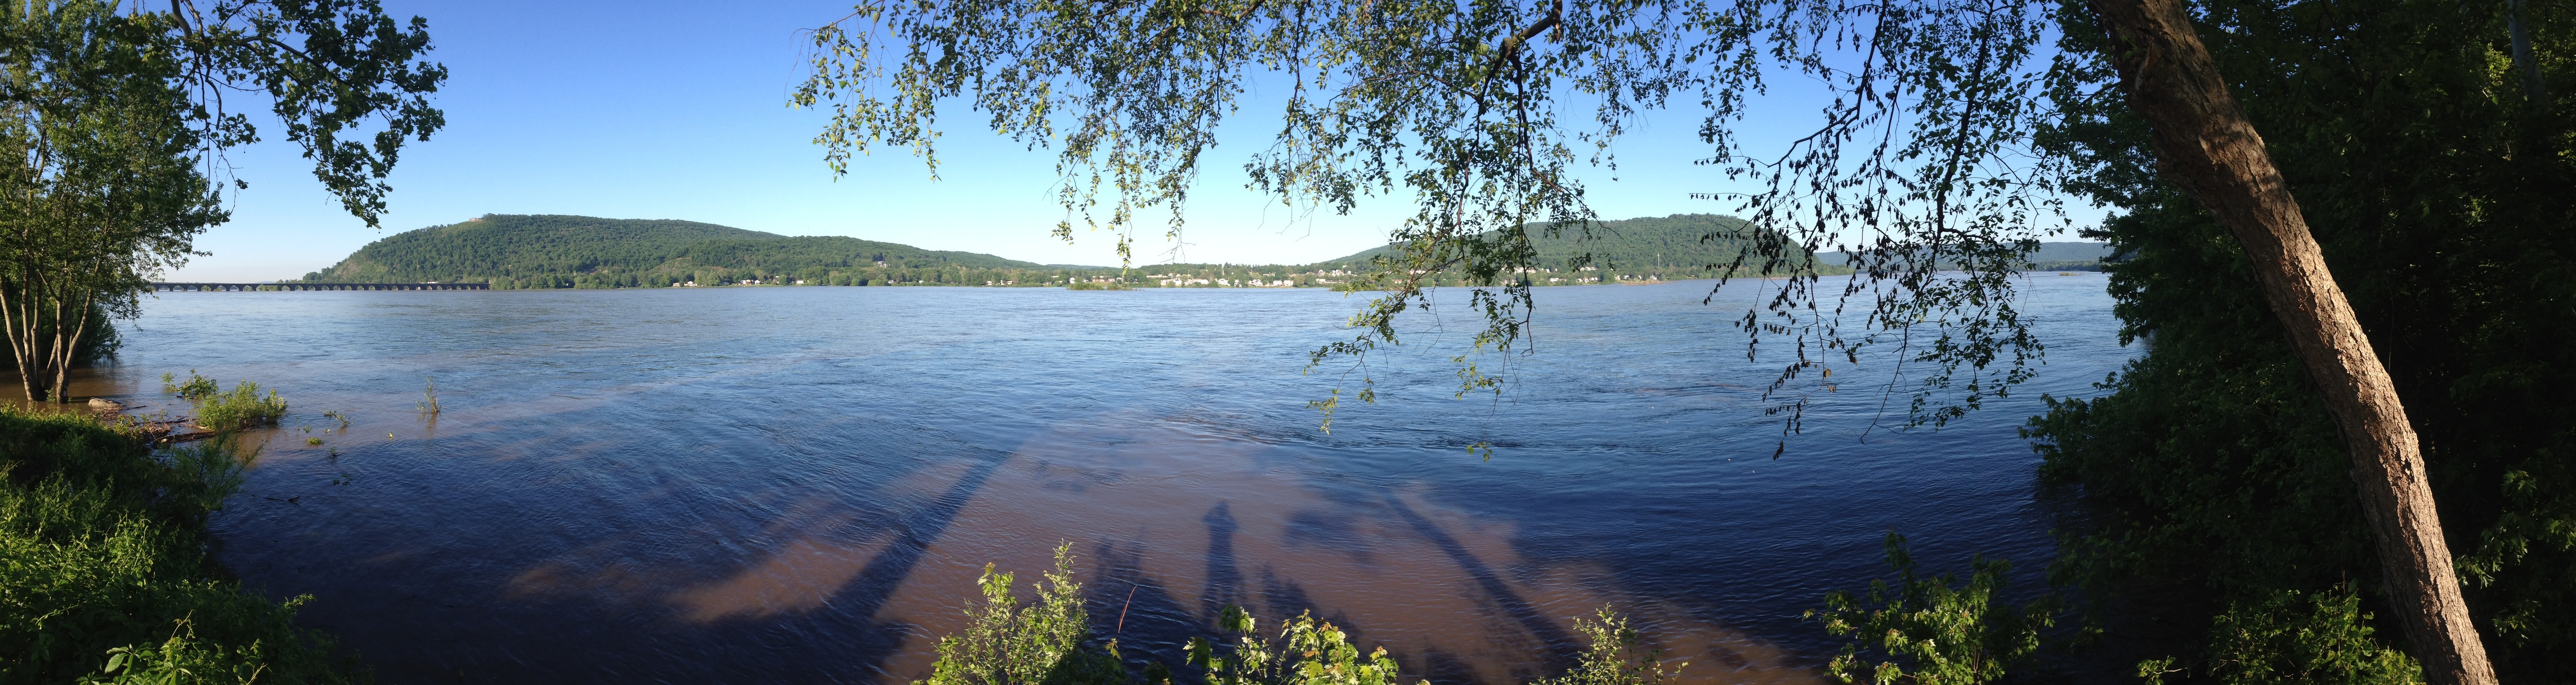 The Susquehanna River viewed from Fort Hunter, PA